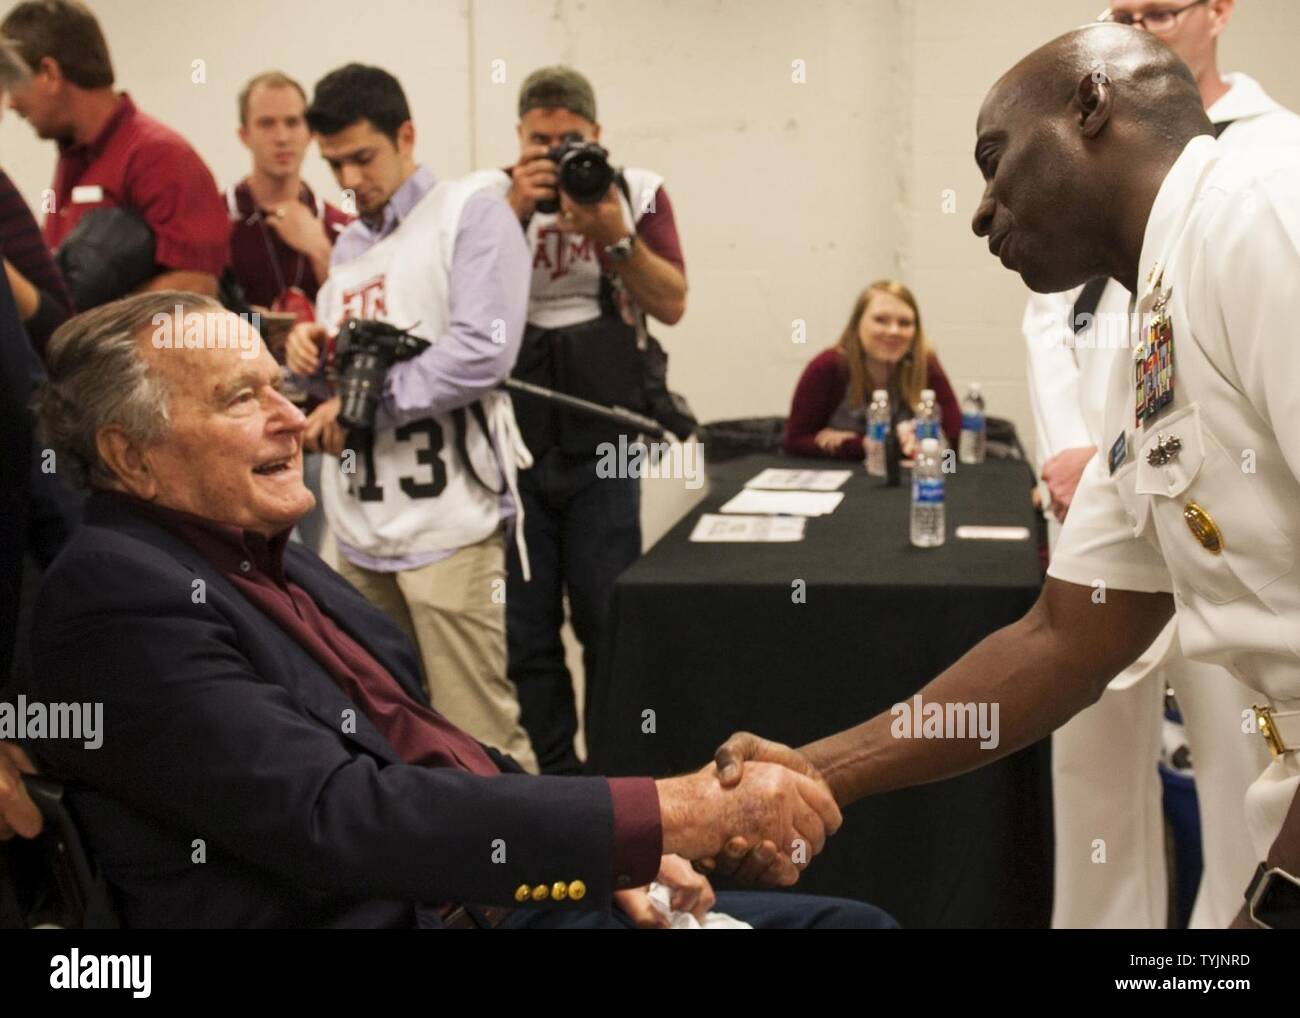 COLLEGE STATION, Texas (Nov. 16, 2016) USS George H.W. Bush (CVN 77) Command Master Chief Huben Phillips meets former president George H.W. Bush during a military appreciation football game at Texas A&M University. The game is part of a two-day namesake trip to Texas where Sailors engaged with the local community about the importance of the Navy in defense and prosperity. Stock Photo